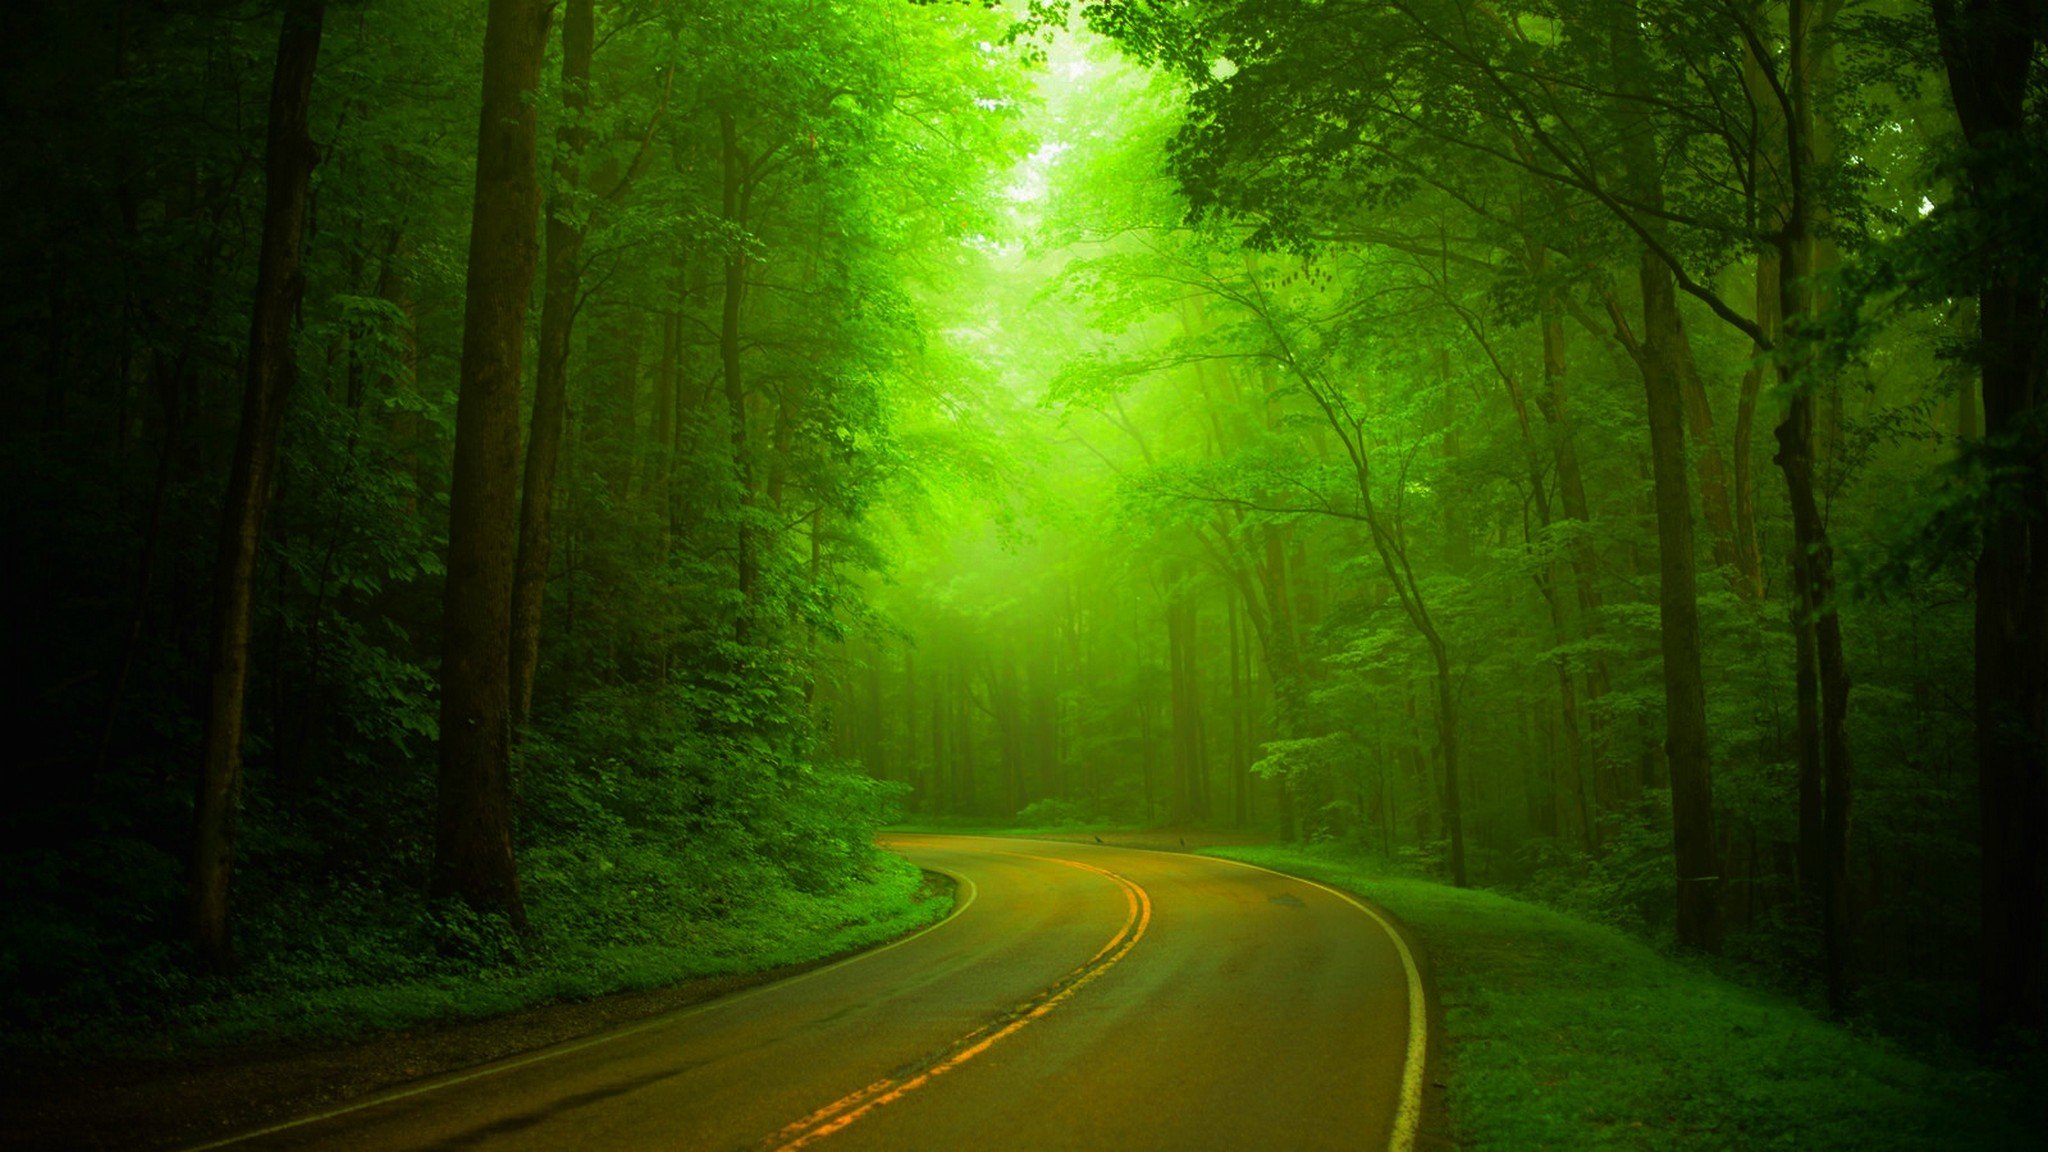 trees, Wal, Forest, Nature, Path, Splendor, Road, Green, Park, Spring